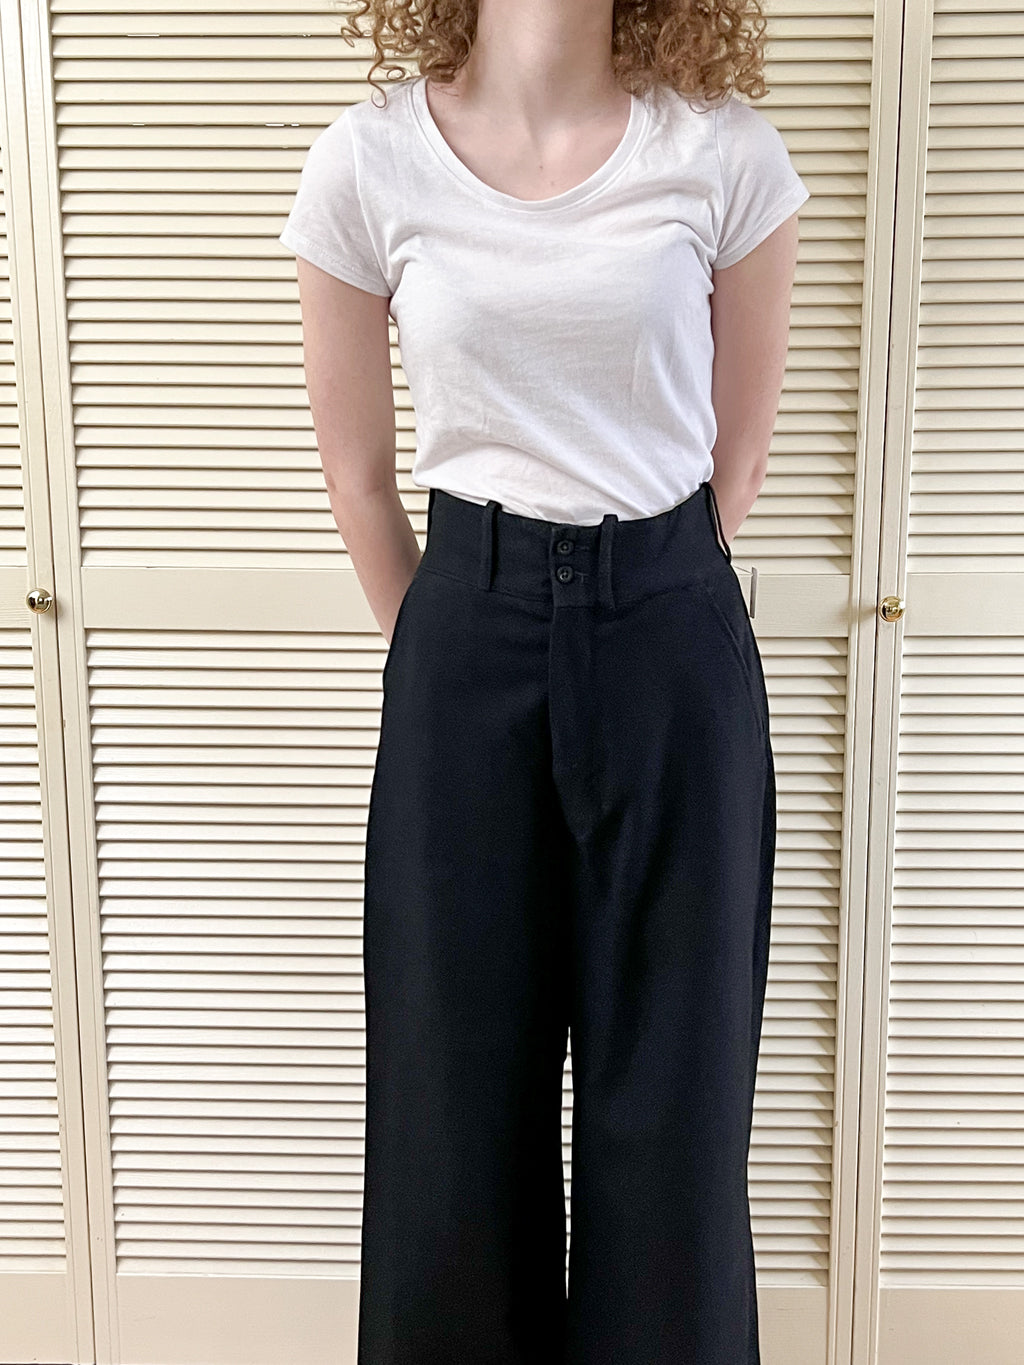 Vintage 1940s Rare British Navy Military Wool Twill Sailor Pants w Mega  Wide Legs - Choose Your Size